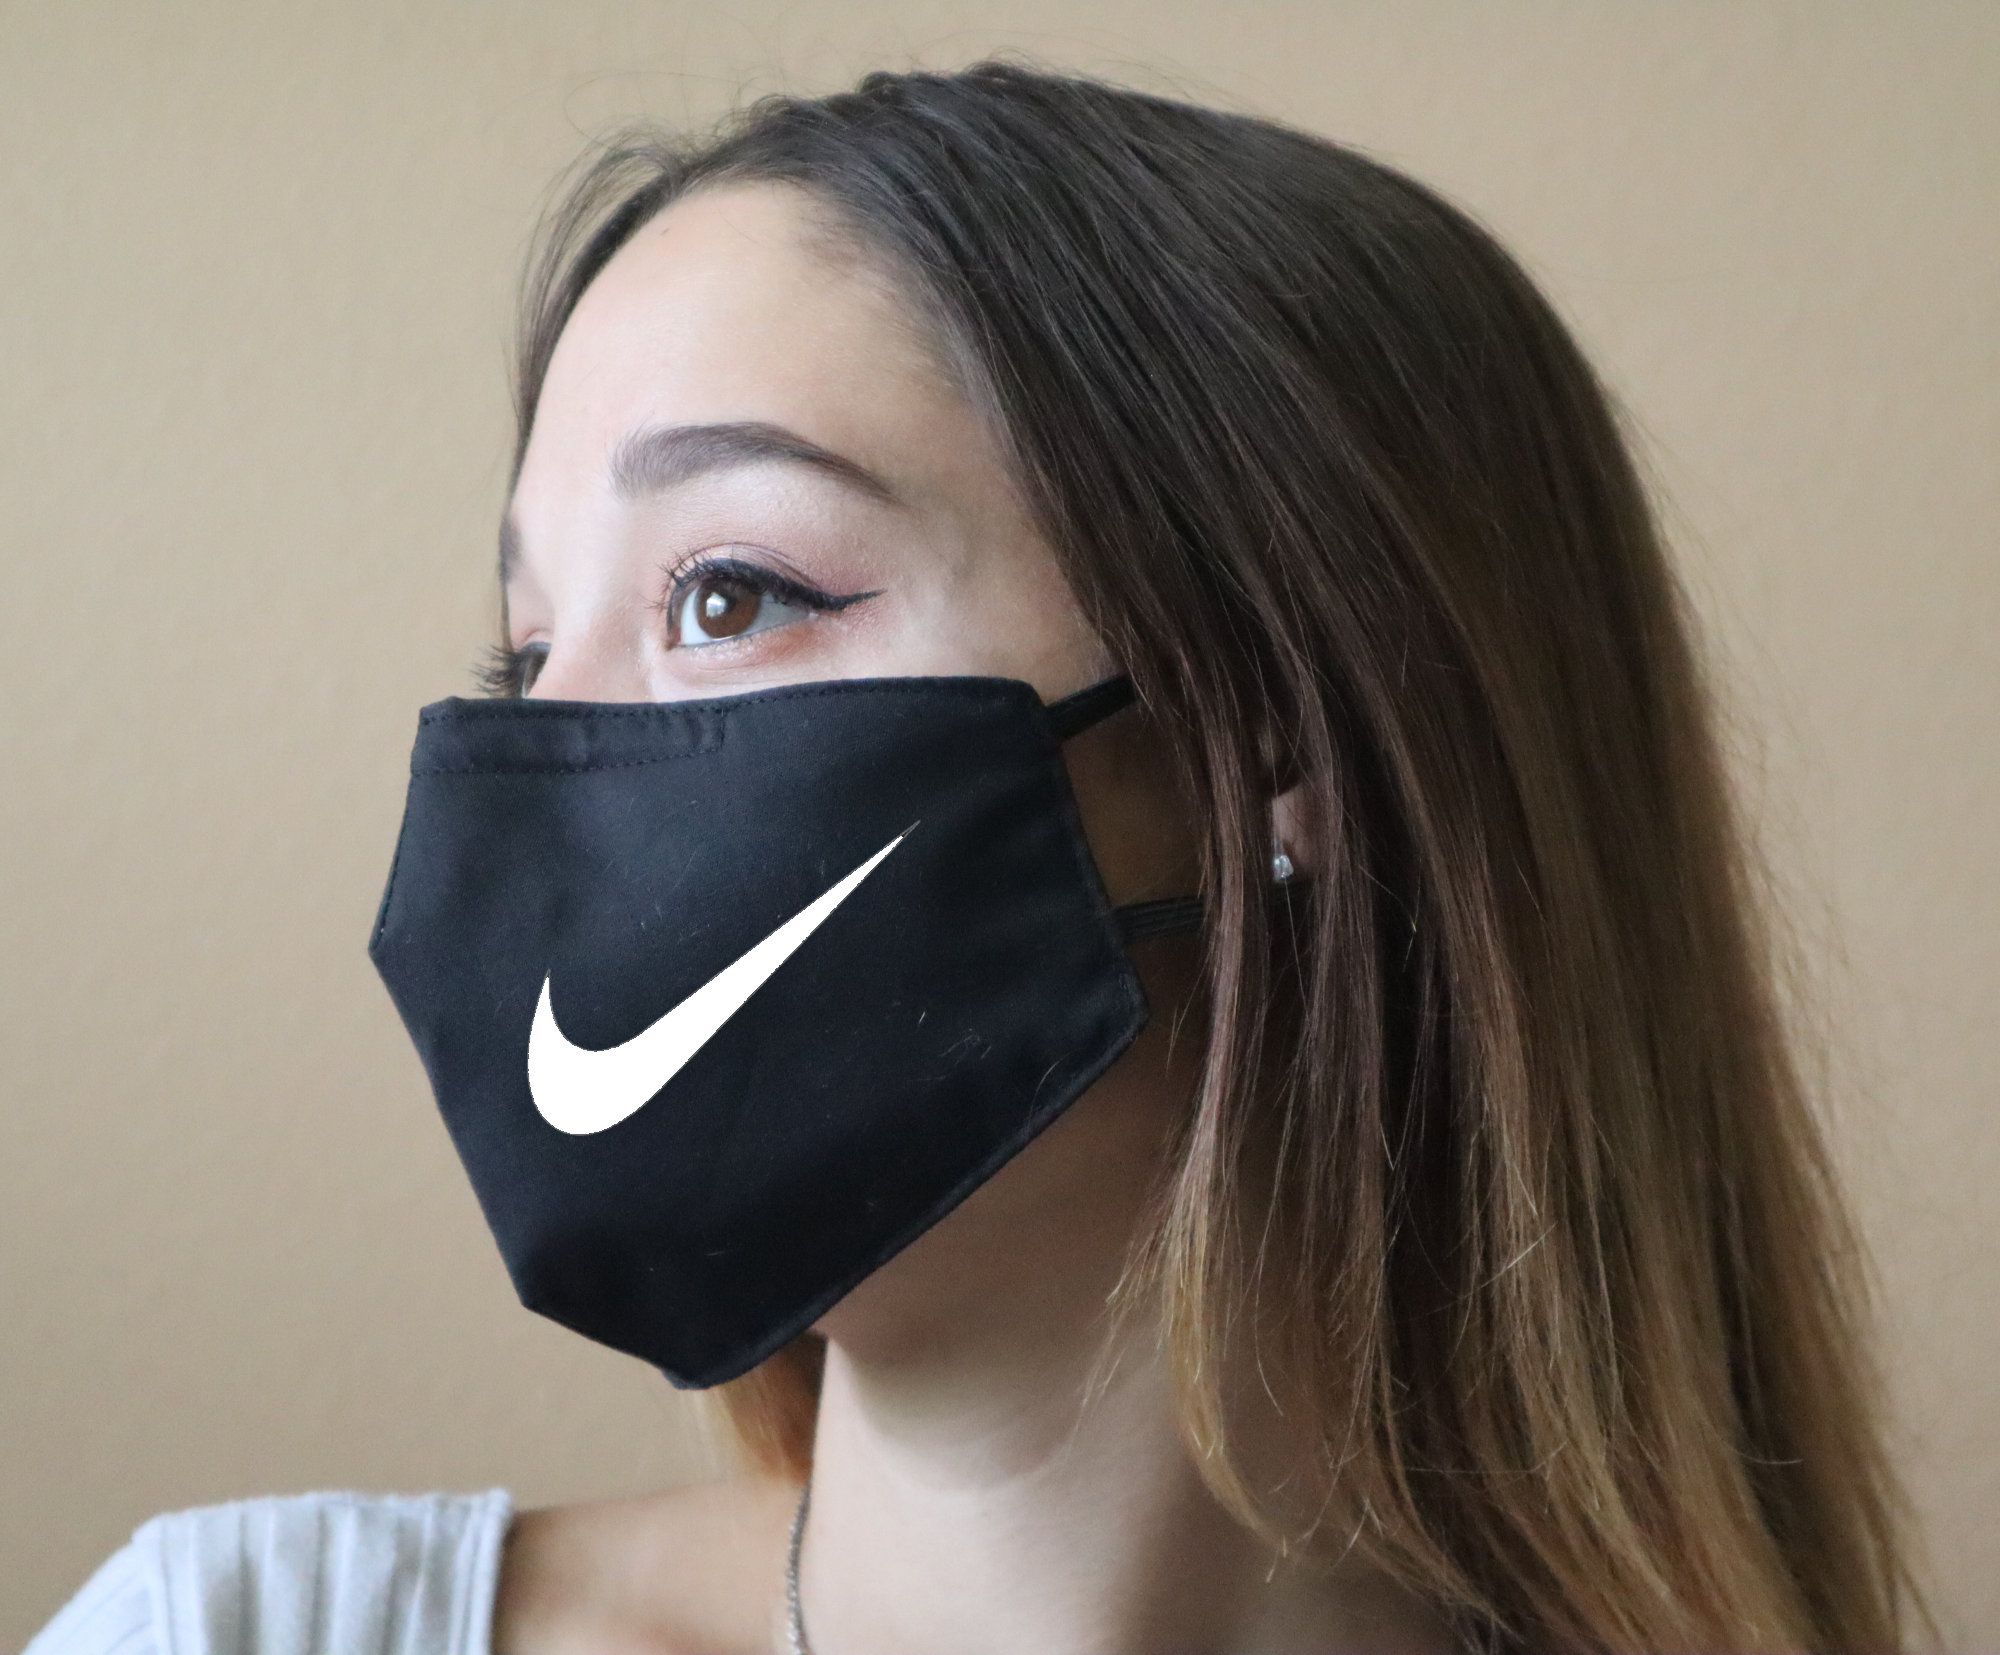 Handmade Cotton Blend Customizable Face Masks With Adjustable Ear-Loops - Nike Adult Large 10 X 6.5"